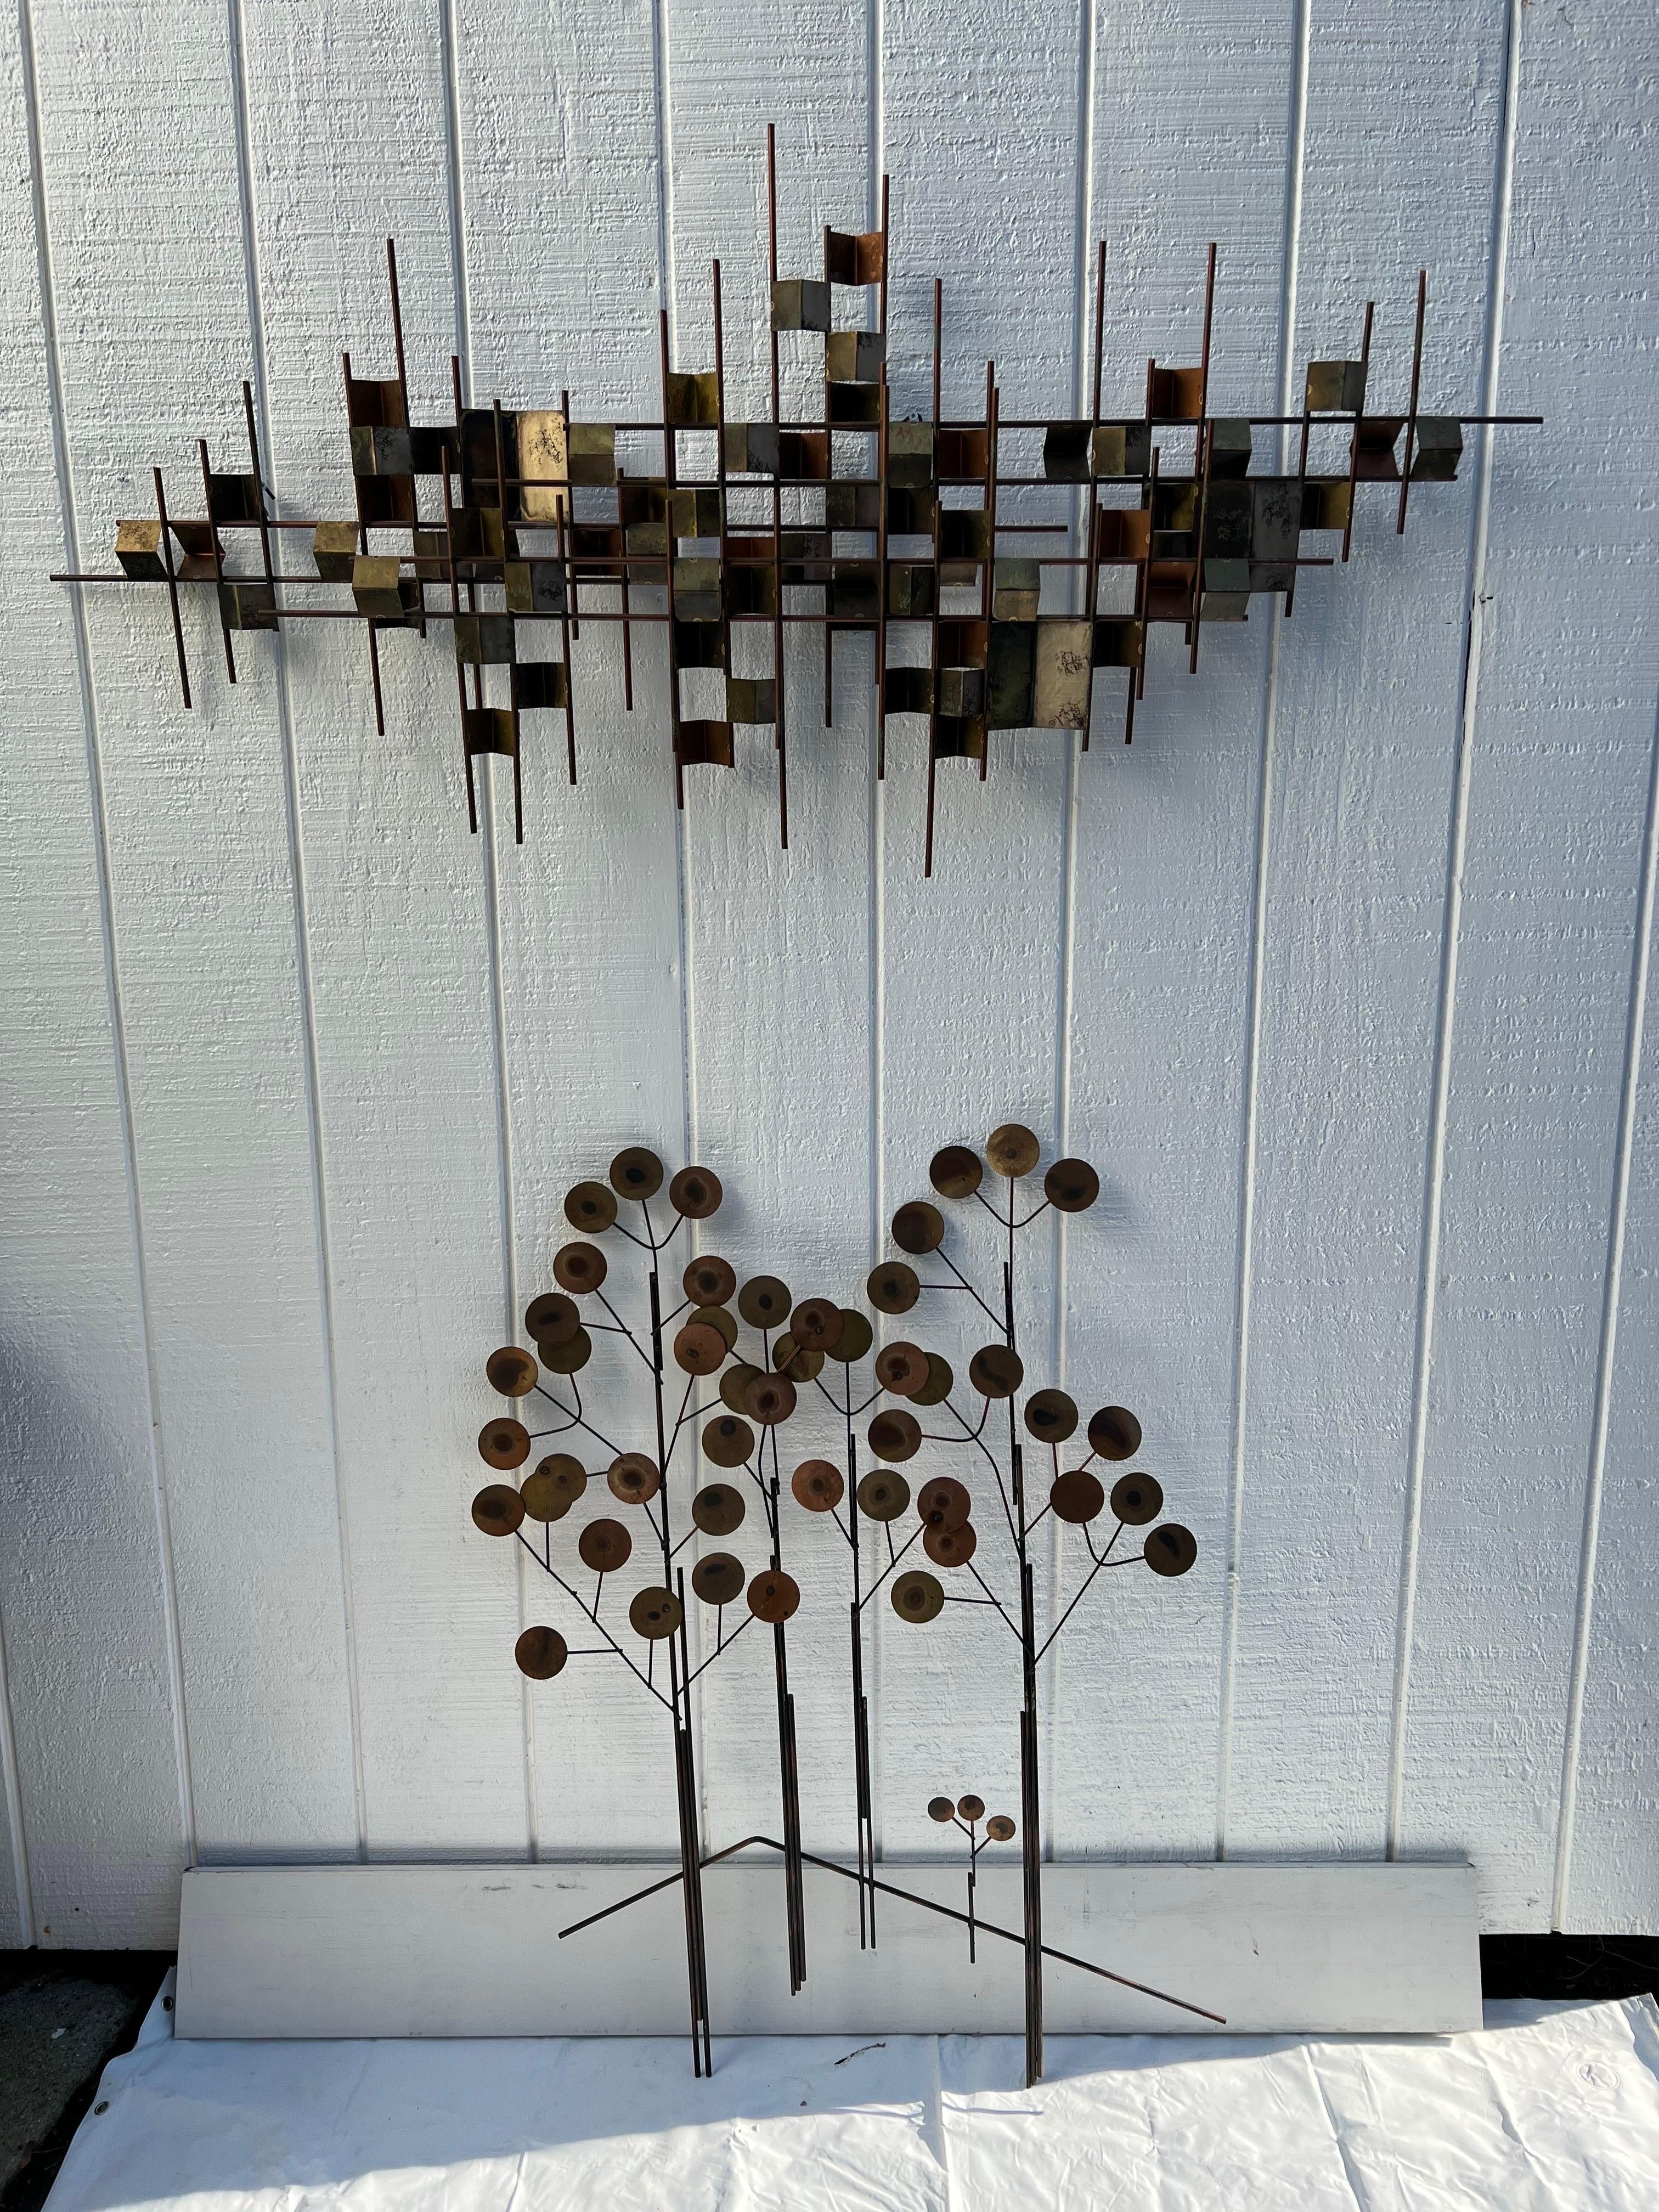 Metal Curtis Jere Raindrops Tree Wall Sculpture For Sale